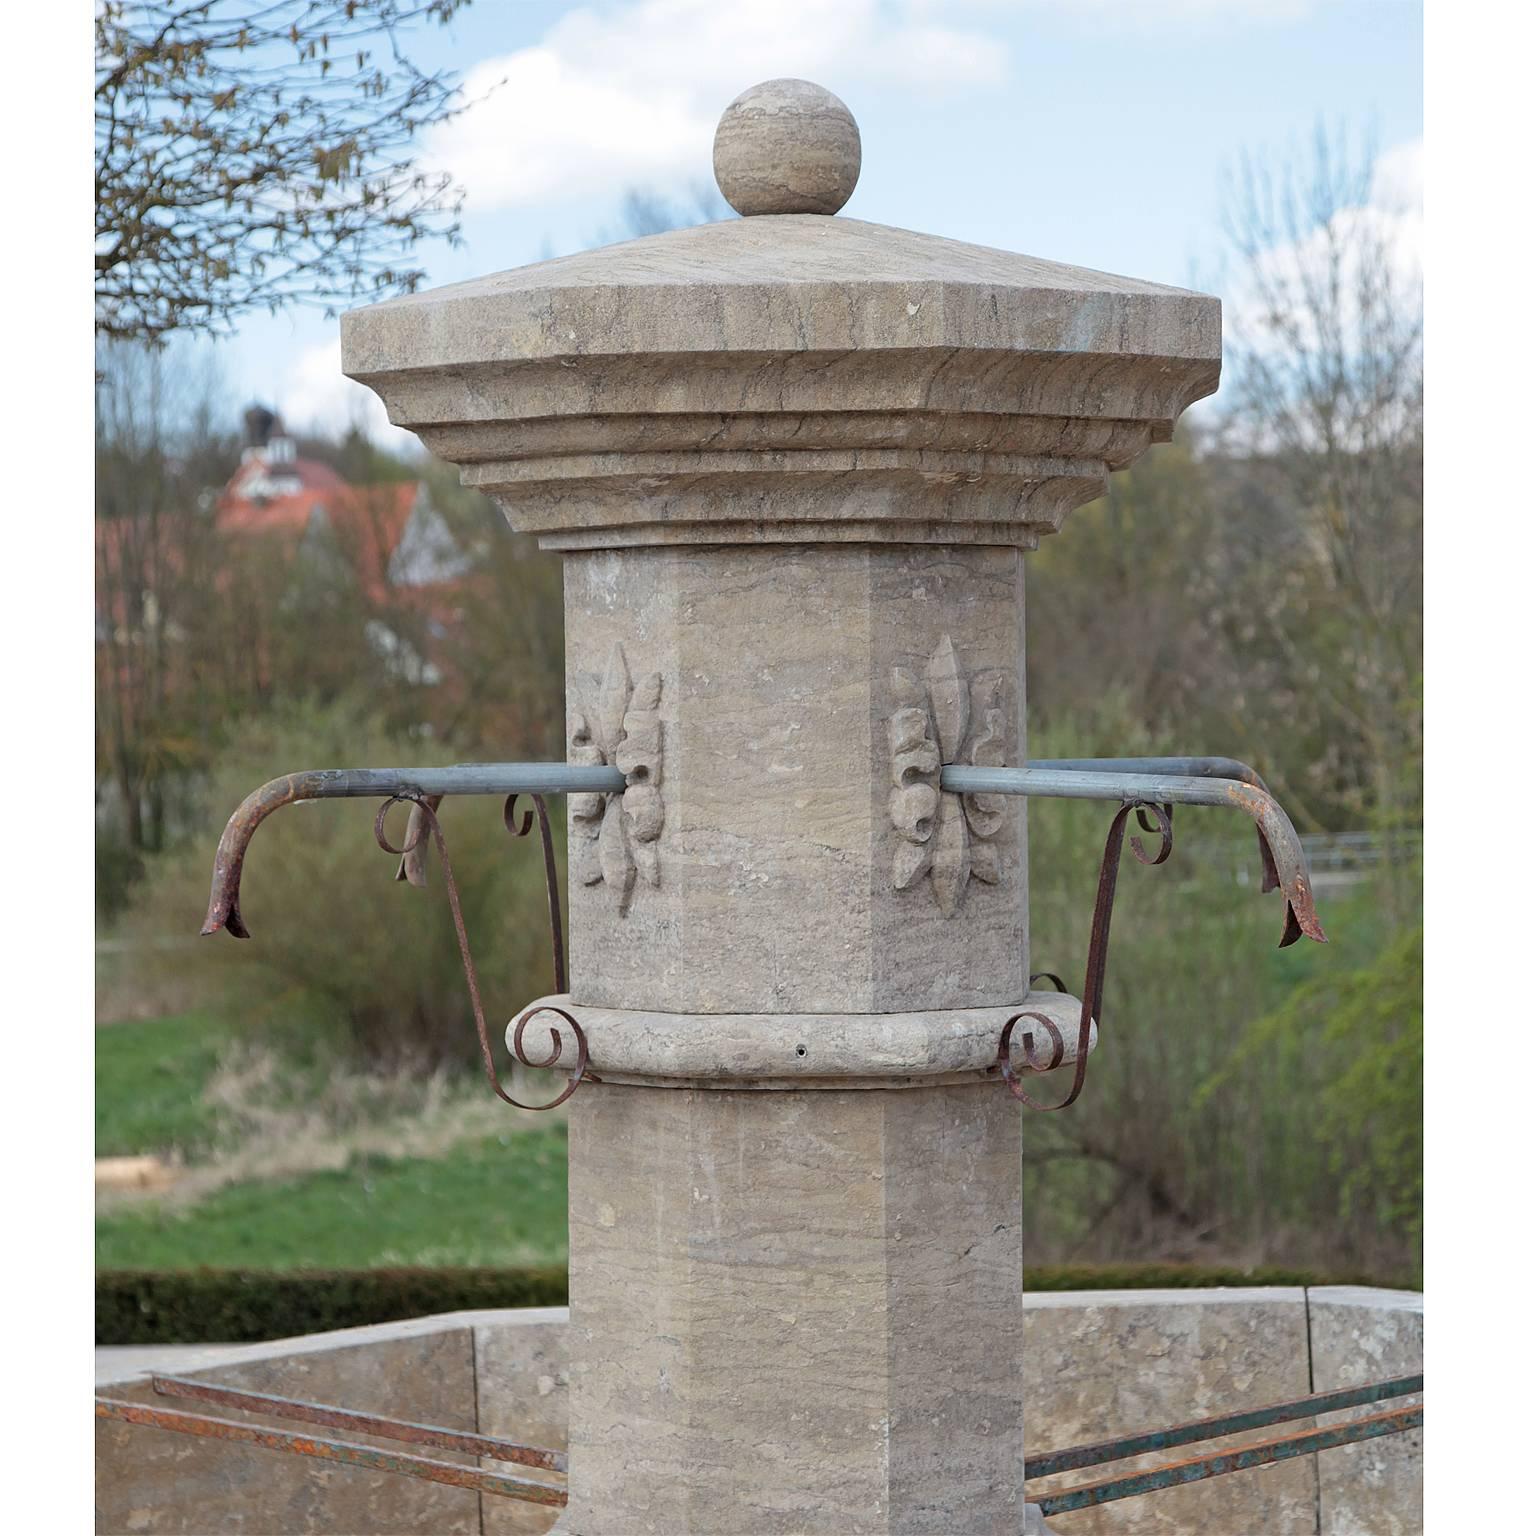 A fountain with a central risalit crowned with a ball and an octagonal, profiled rim. The water comes out of four metal spigots, which project out of flower ornamentations. The height of the rim is 62cm. The fountain is finished with hand-worked